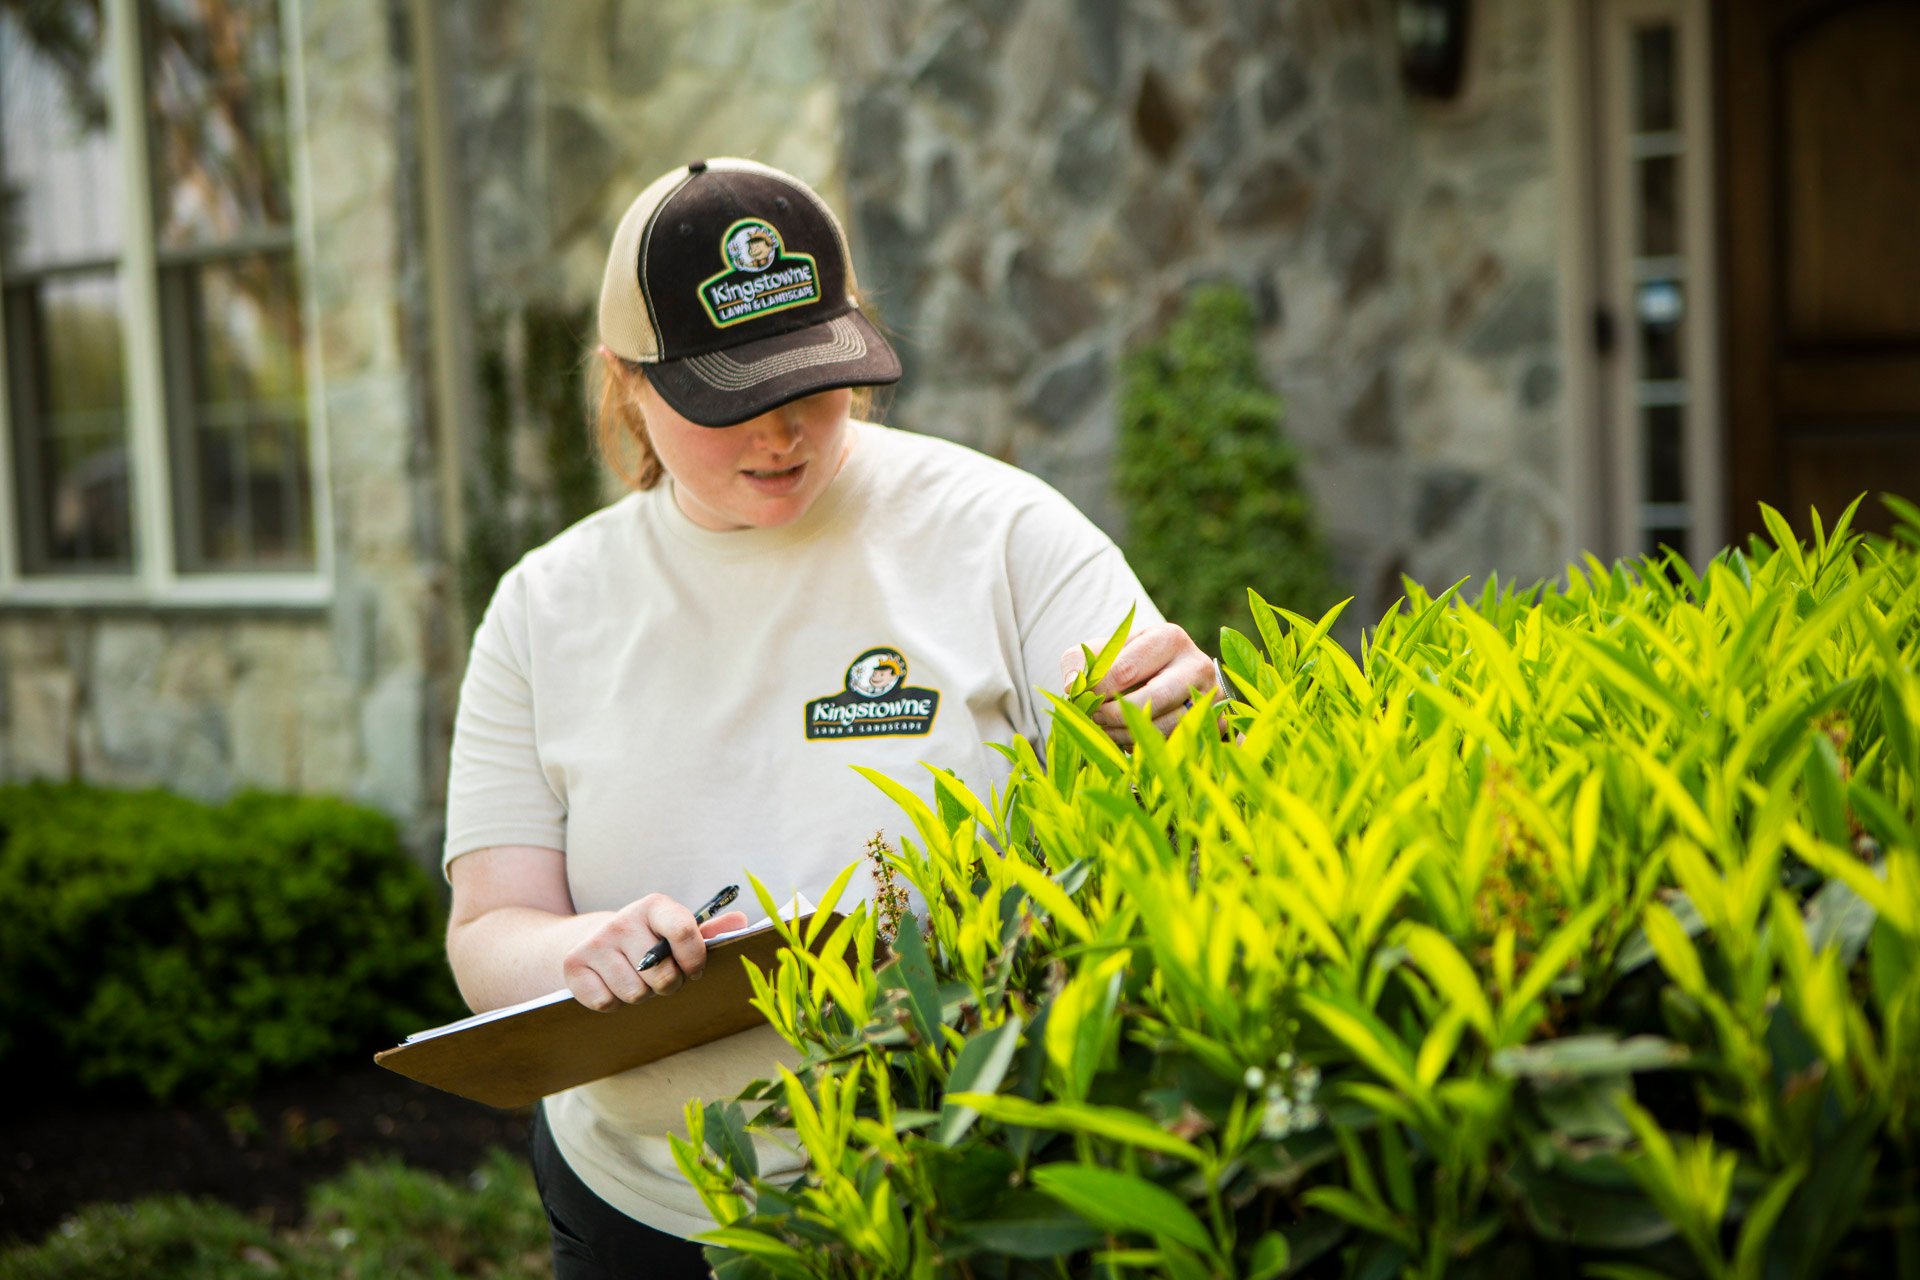 plant health care expert inspects leaves on shrubs